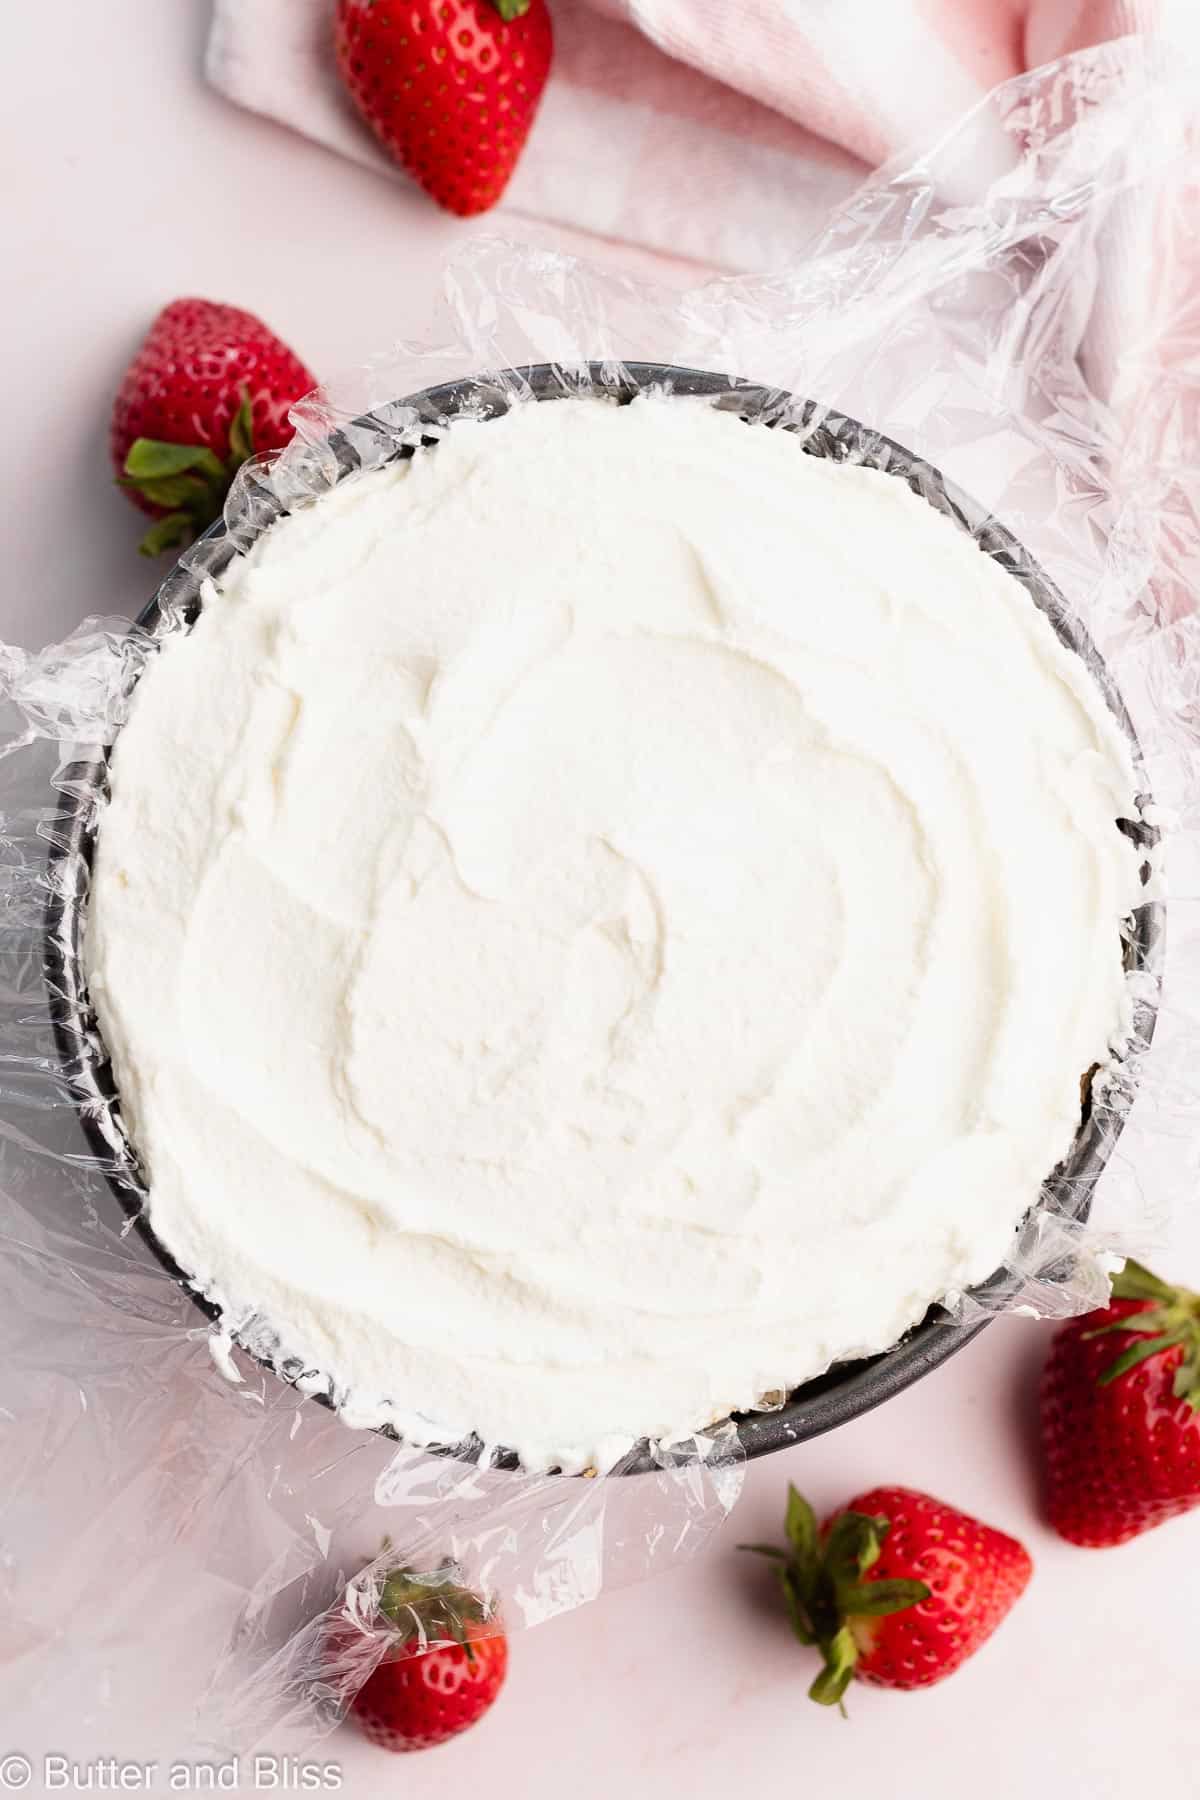 The whipped cream layer in an easy summer no-bake dessert.